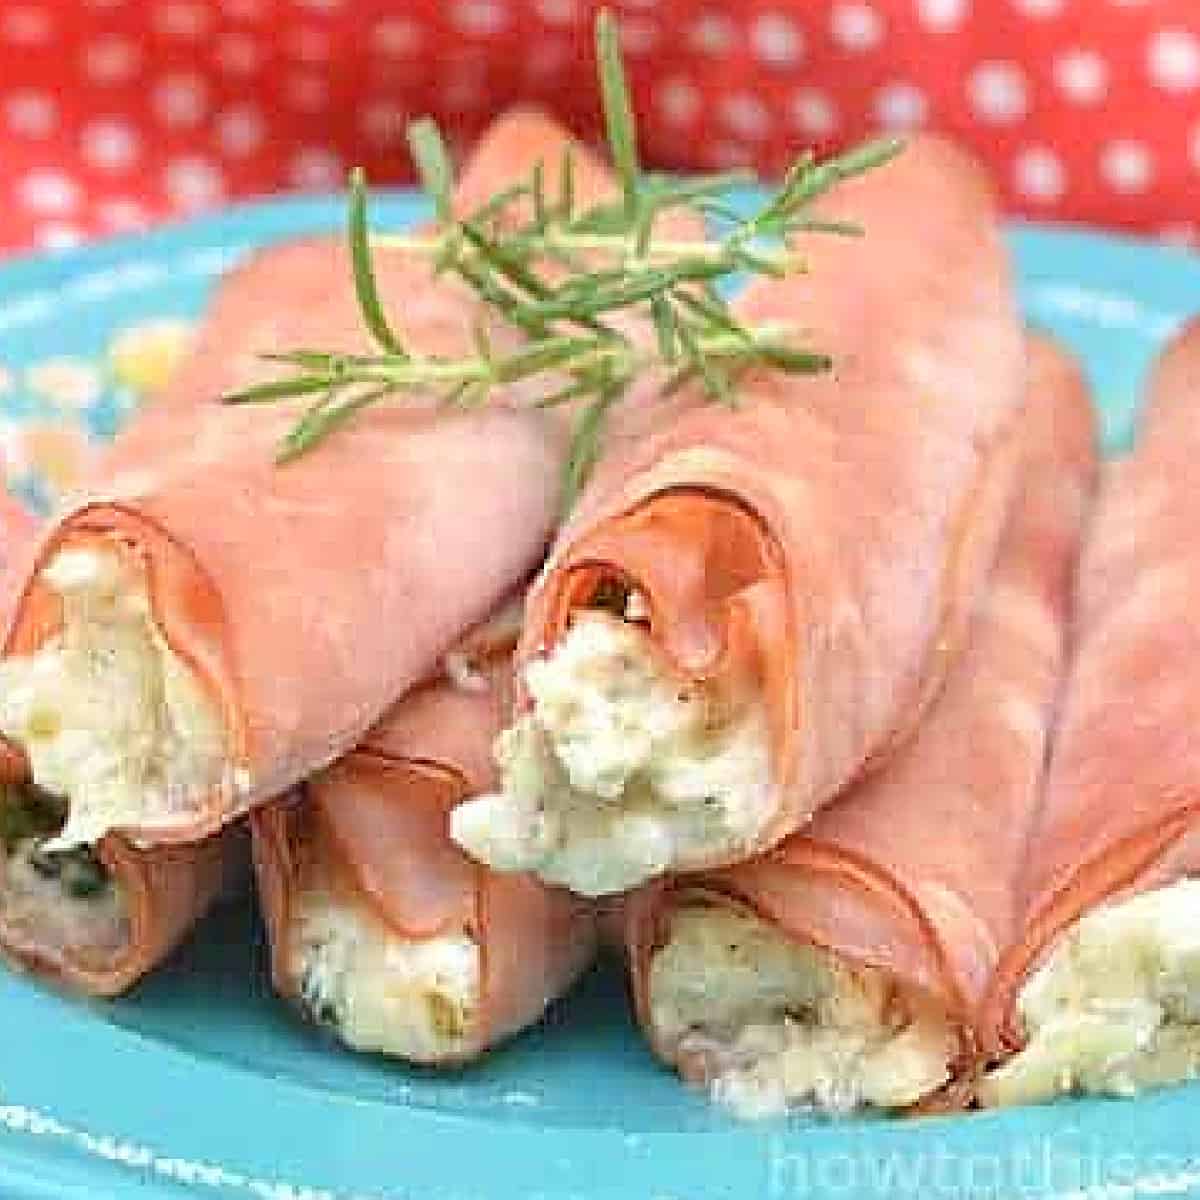 rolled up ham on a plate.